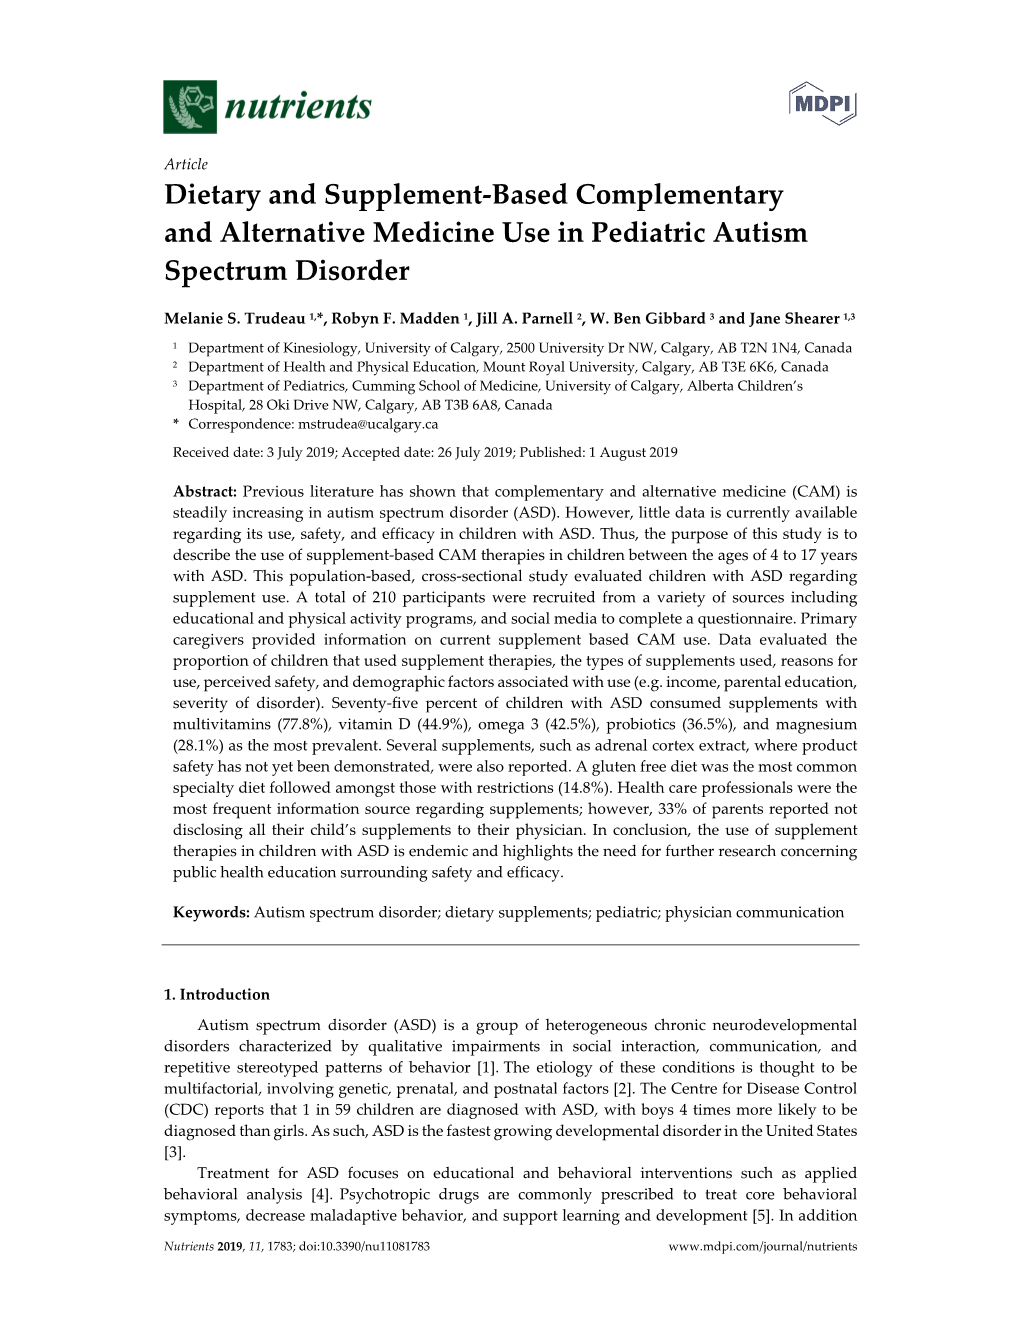 Dietary and Supplement-Based Complementary and Alternative Medicine Use in Pediatric Autism Spectrum Disorder